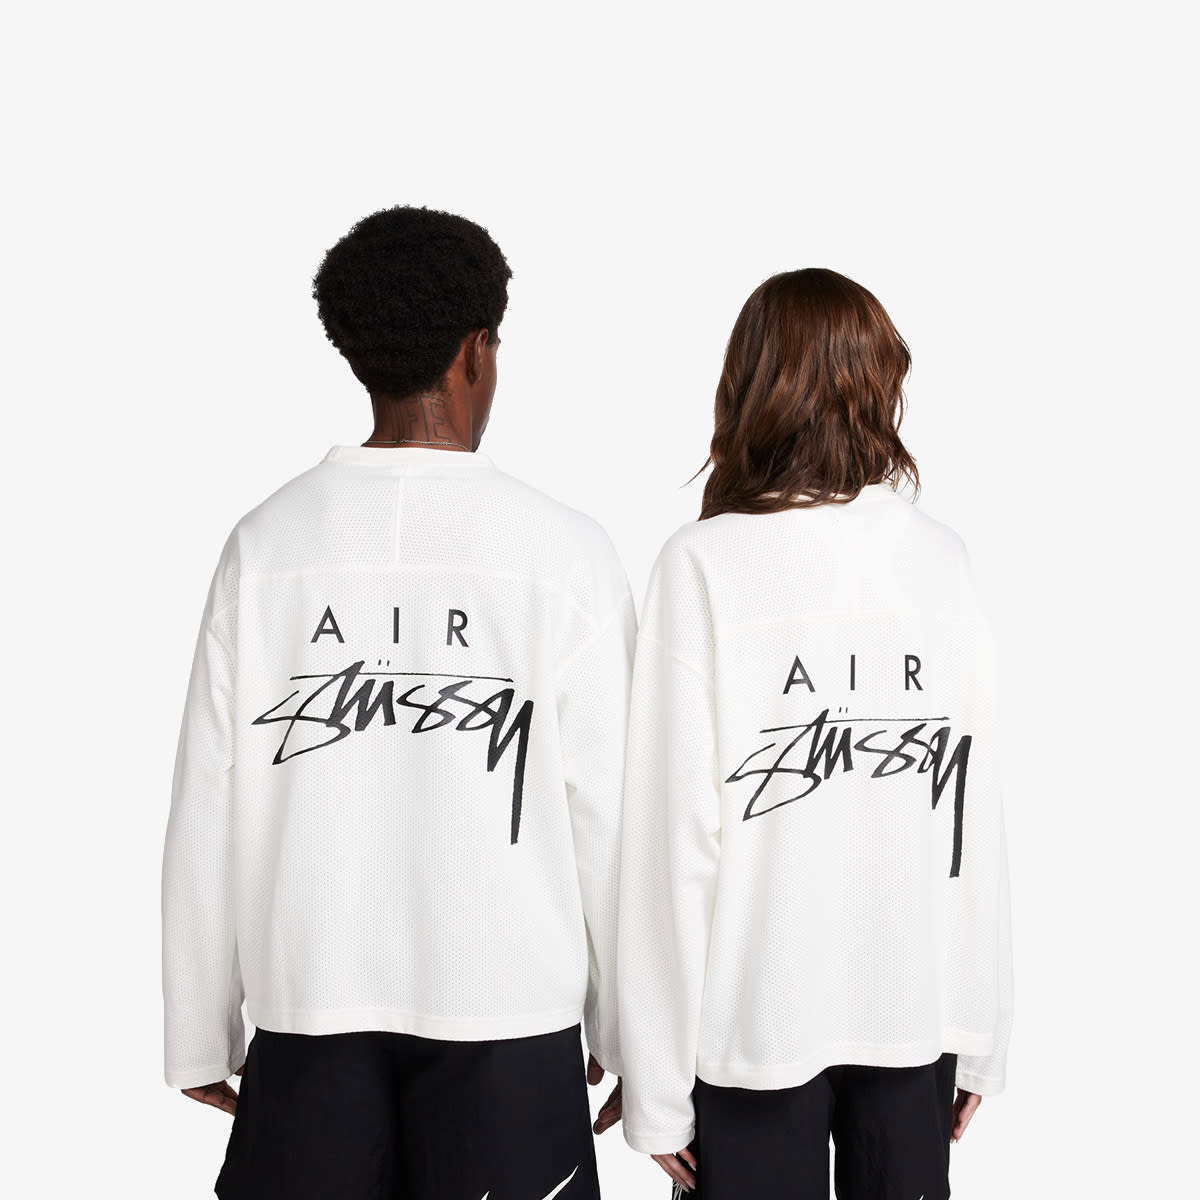 Nike x Stussy Long Sleeve Top (Sail & Black) | END. Launches